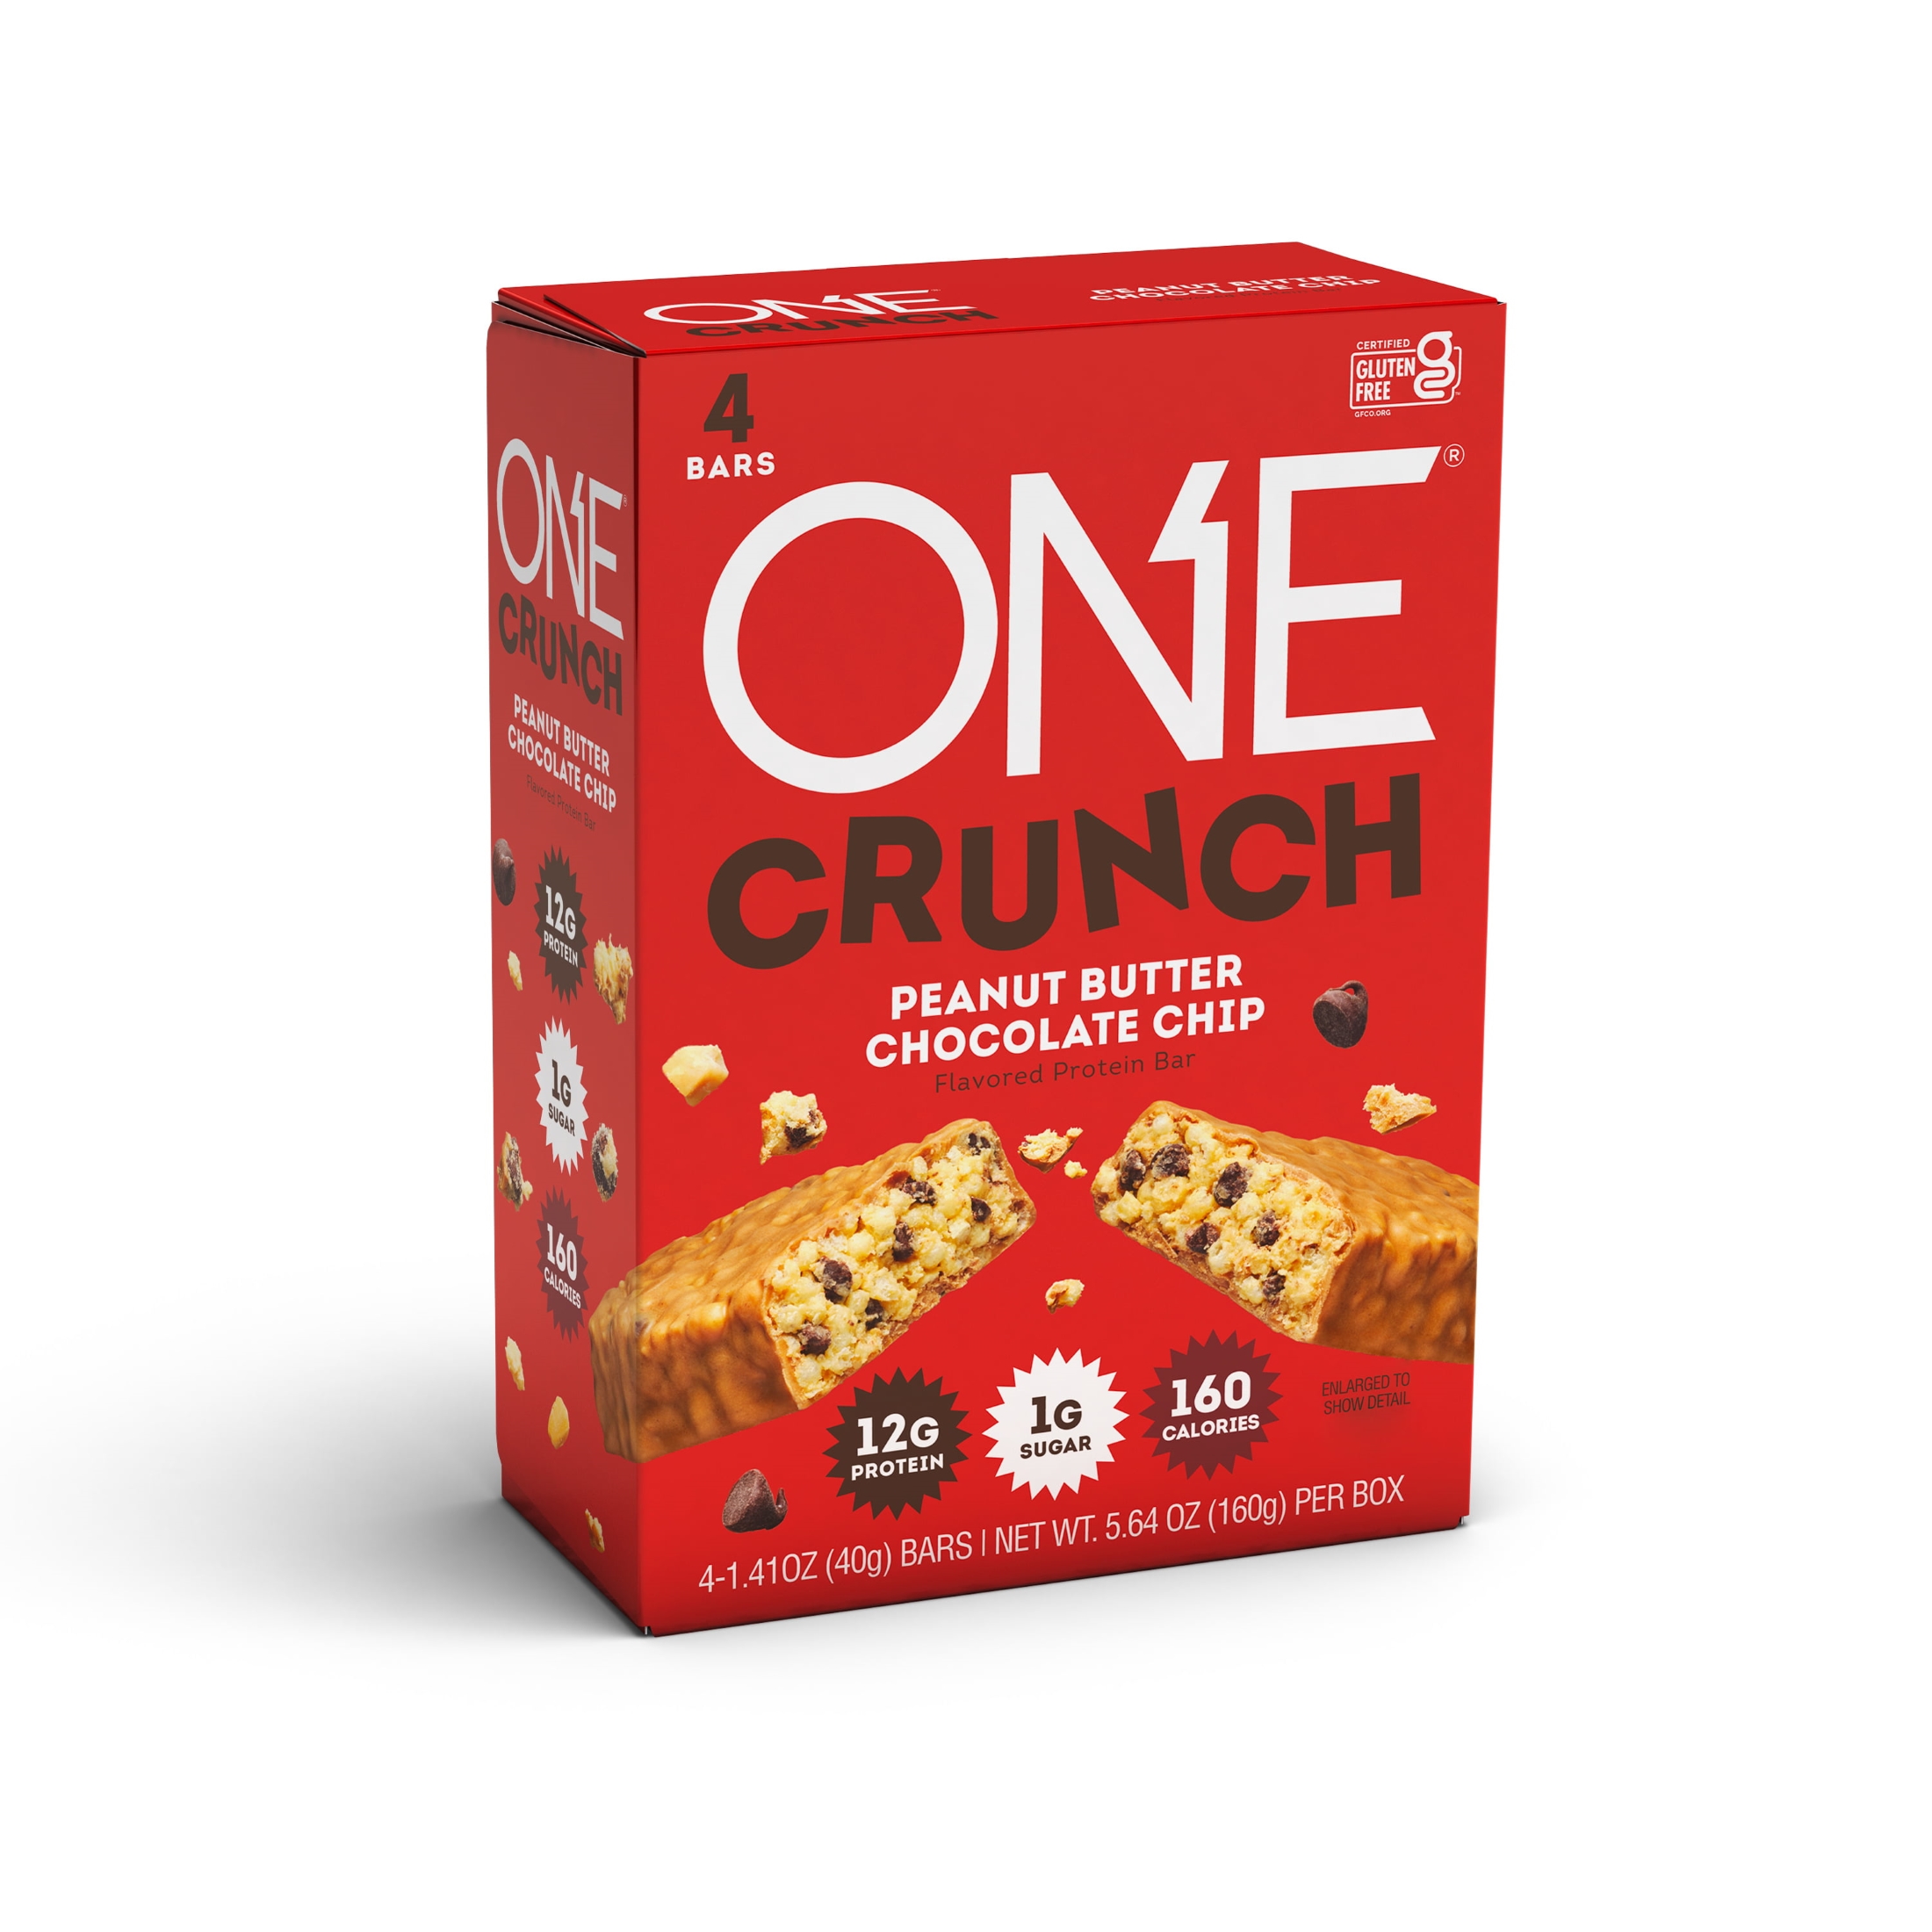 One Crunch Protein Bar, Peanut Butter Chocolate Chip, 12g Protein, 4 Ct - image 1 of 5